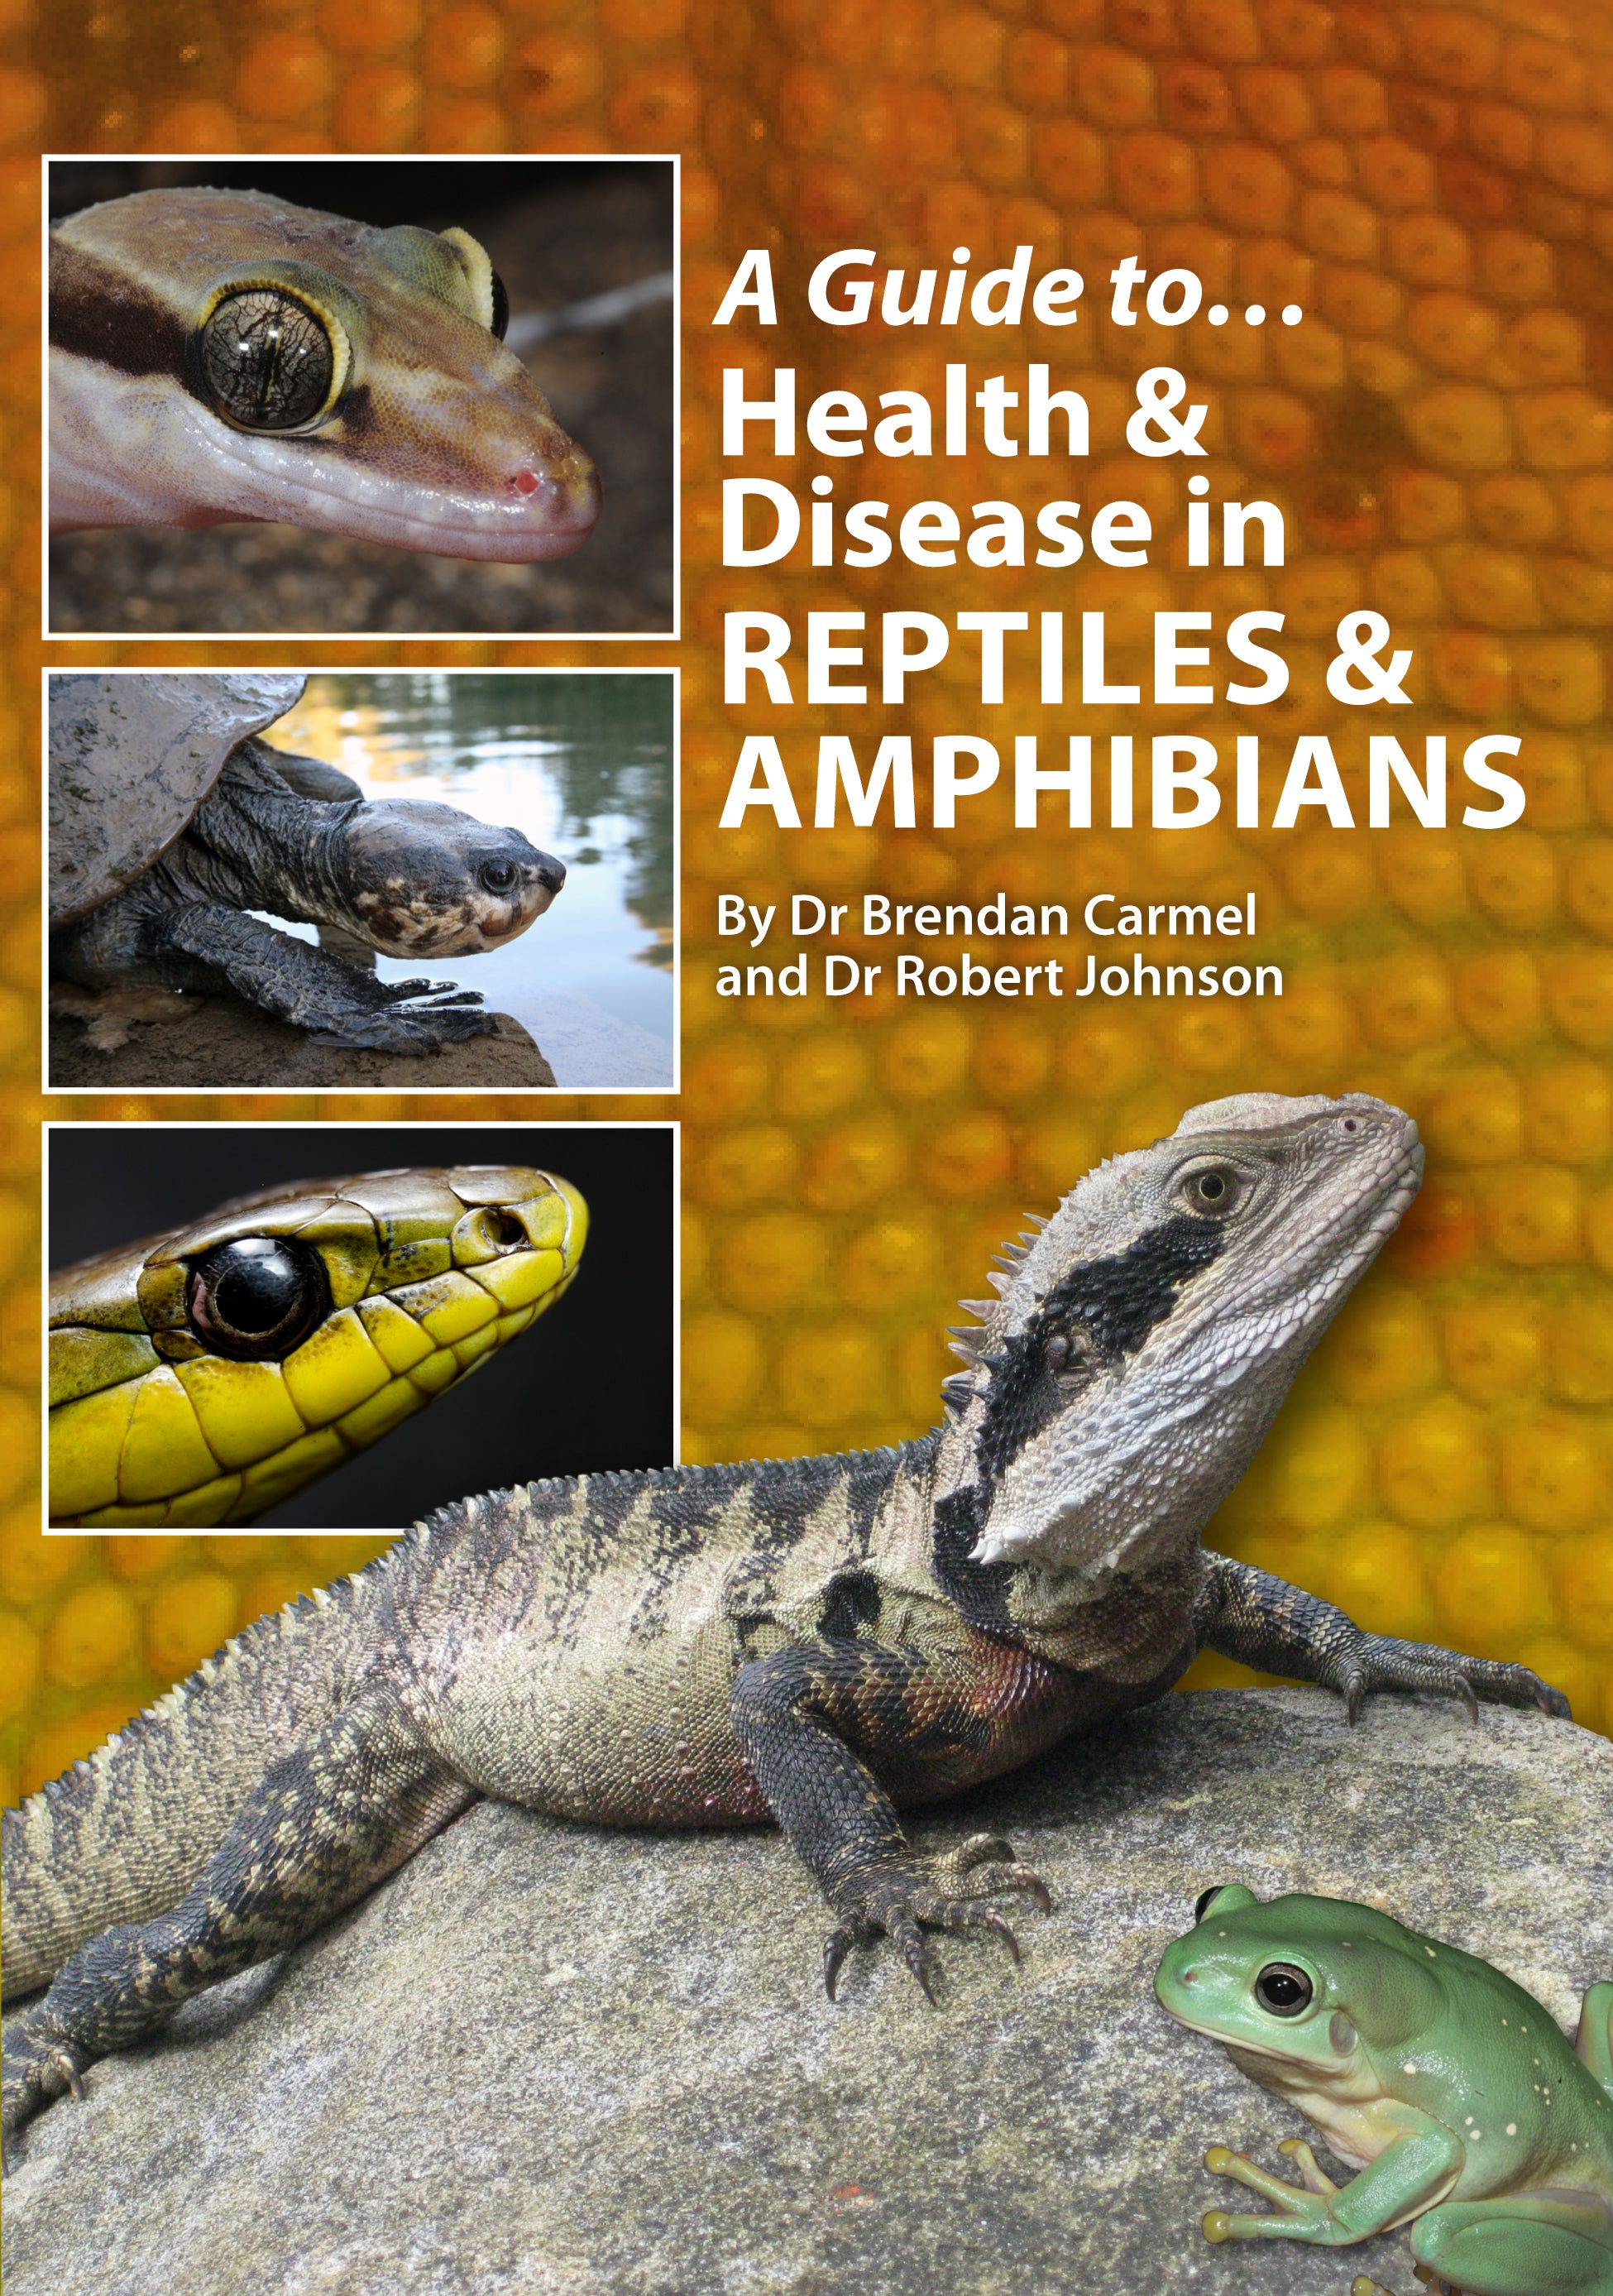 A Guide to Health and Disease in Reptiles and Amphibians